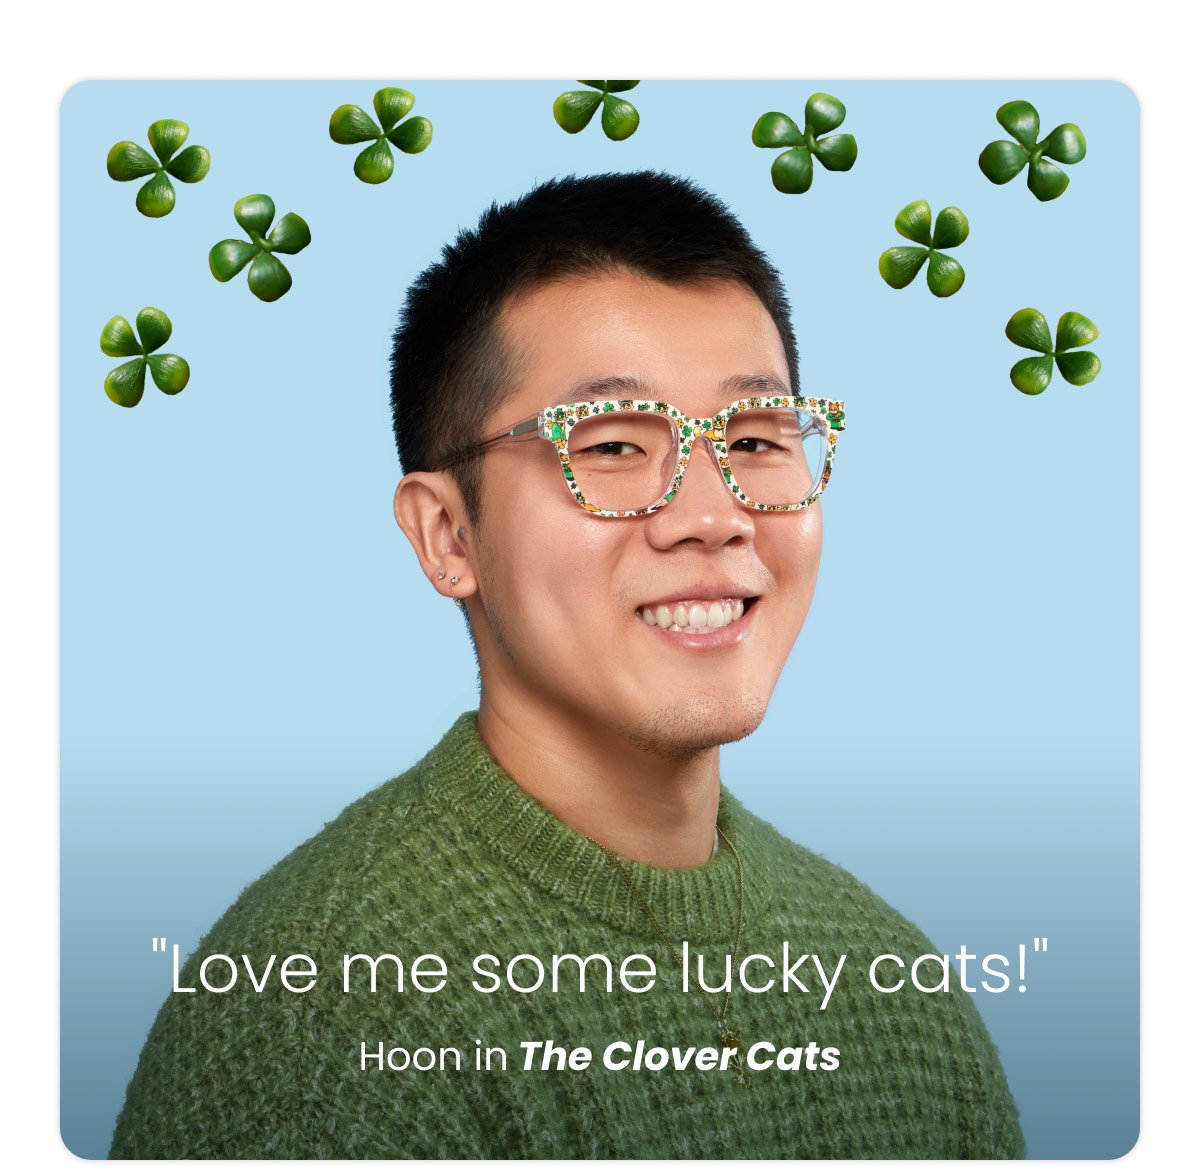 The Clover Cats